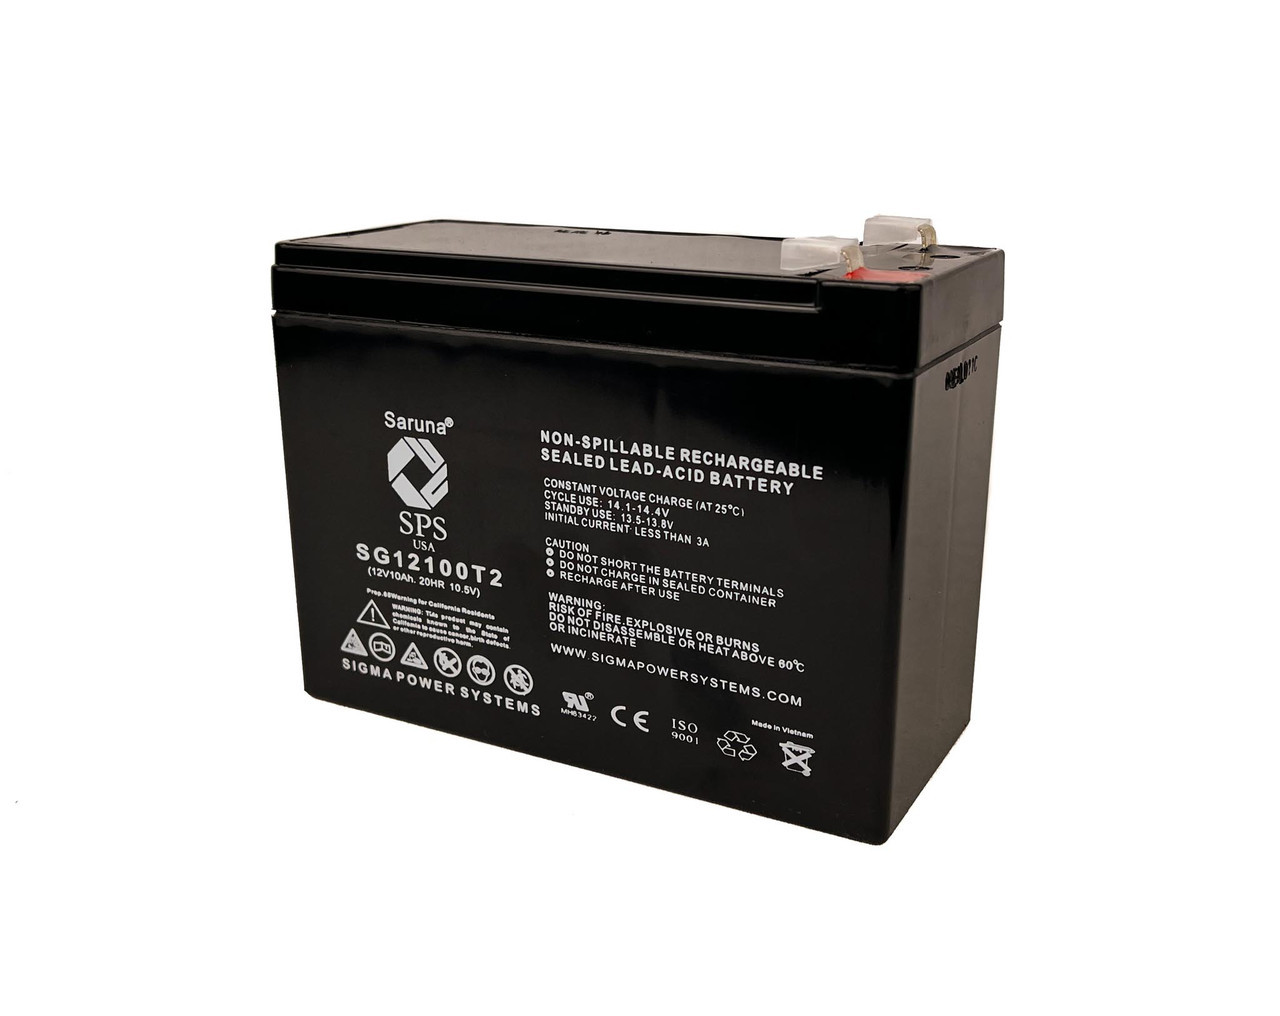 Raion Power 12V 10Ah Non-Spillable Replacement Rechargebale Battery for Mongoose M300 Scooter